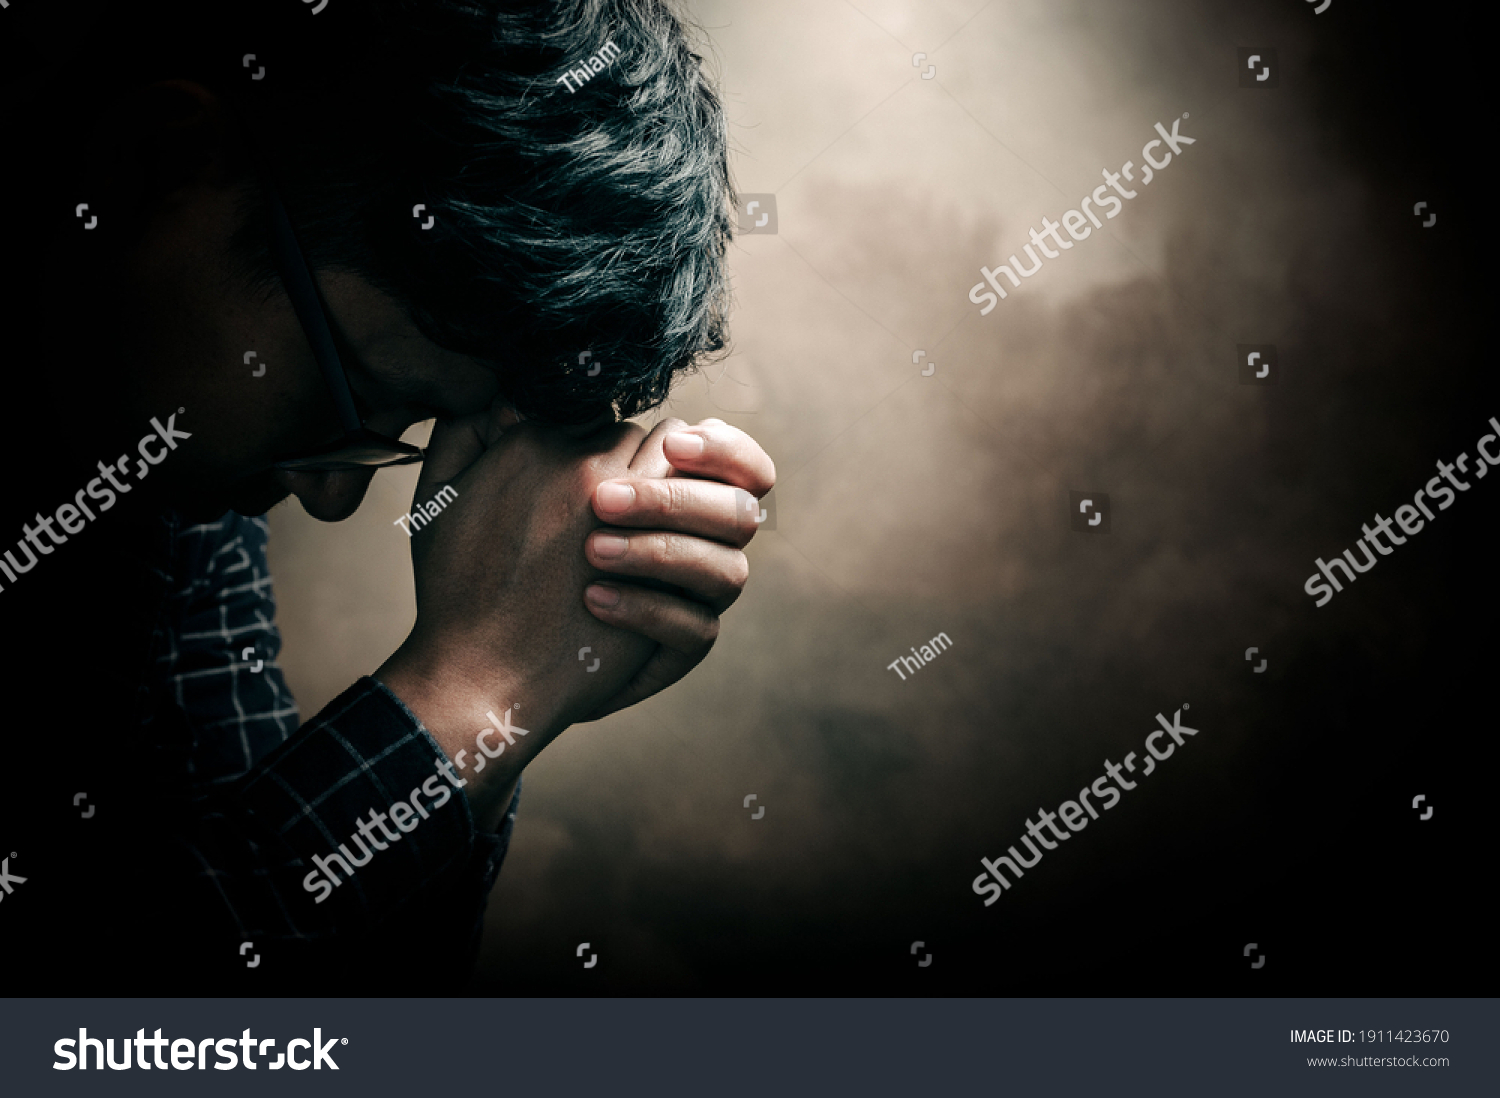 Christian life crisis prayer to god. Man Pray for god blessing to wishing have a better life. man hands praying to god with the bible. believe in goodness. Holding hands in prayer, eyes closed. #1911423670